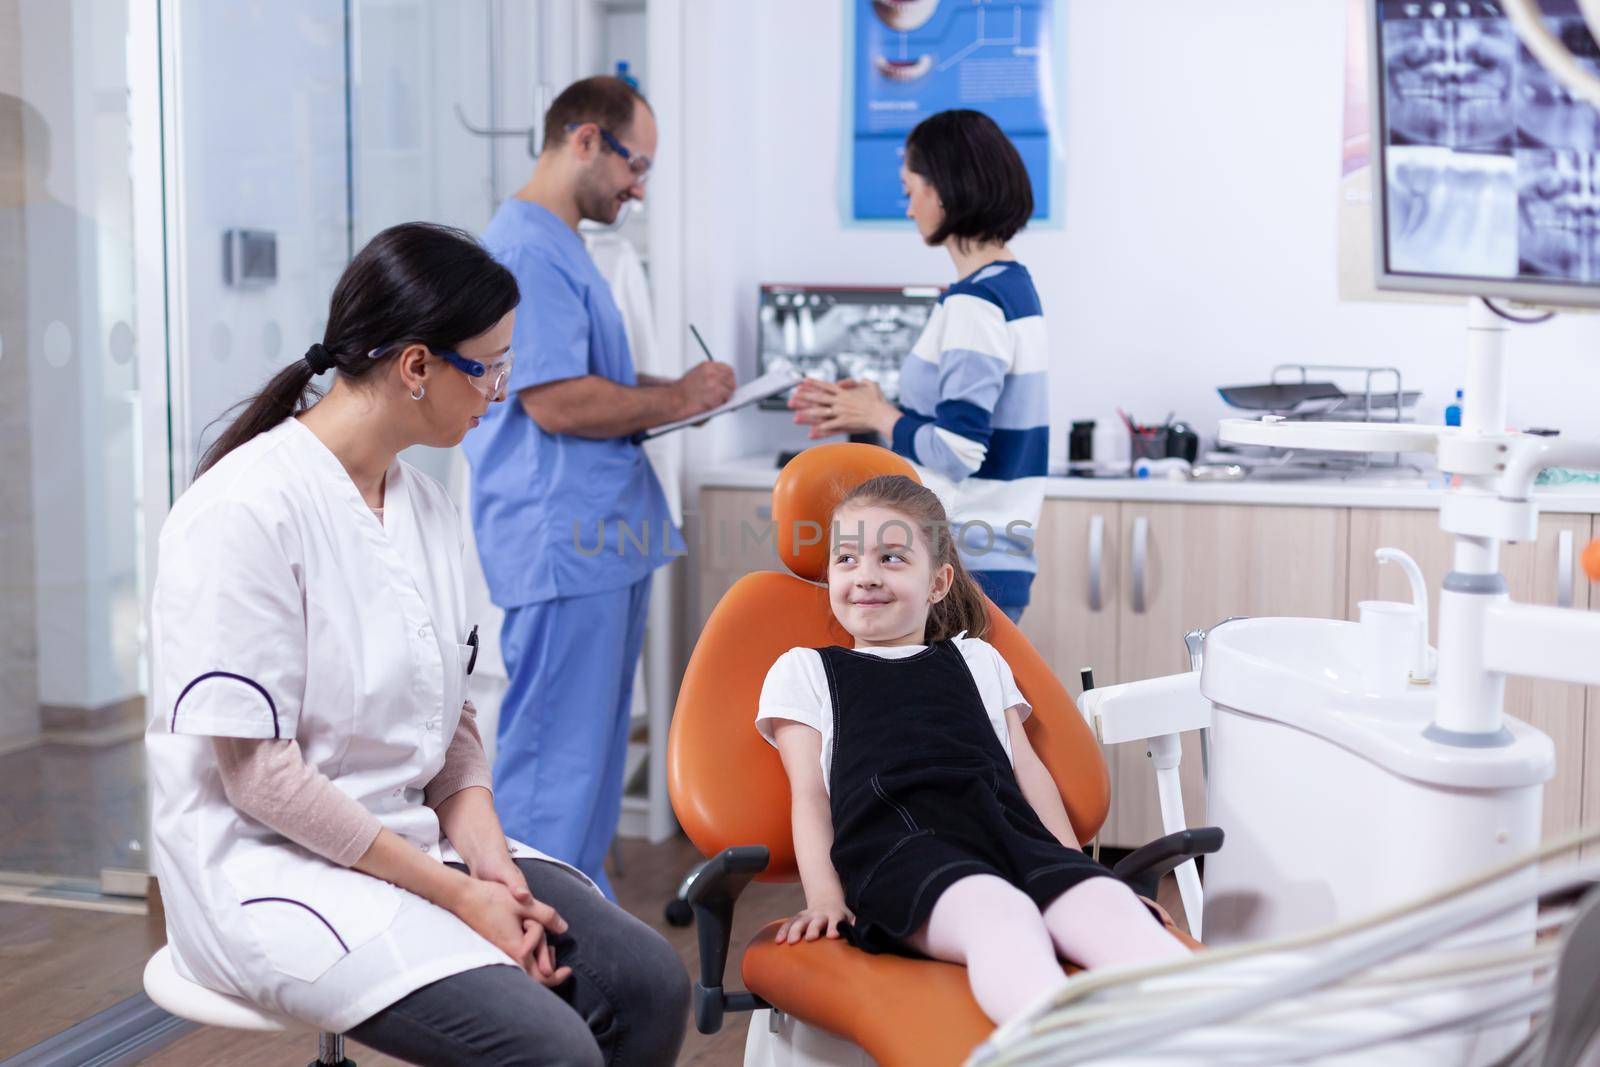 Shy little girl looking up at dentist doctor by DCStudio